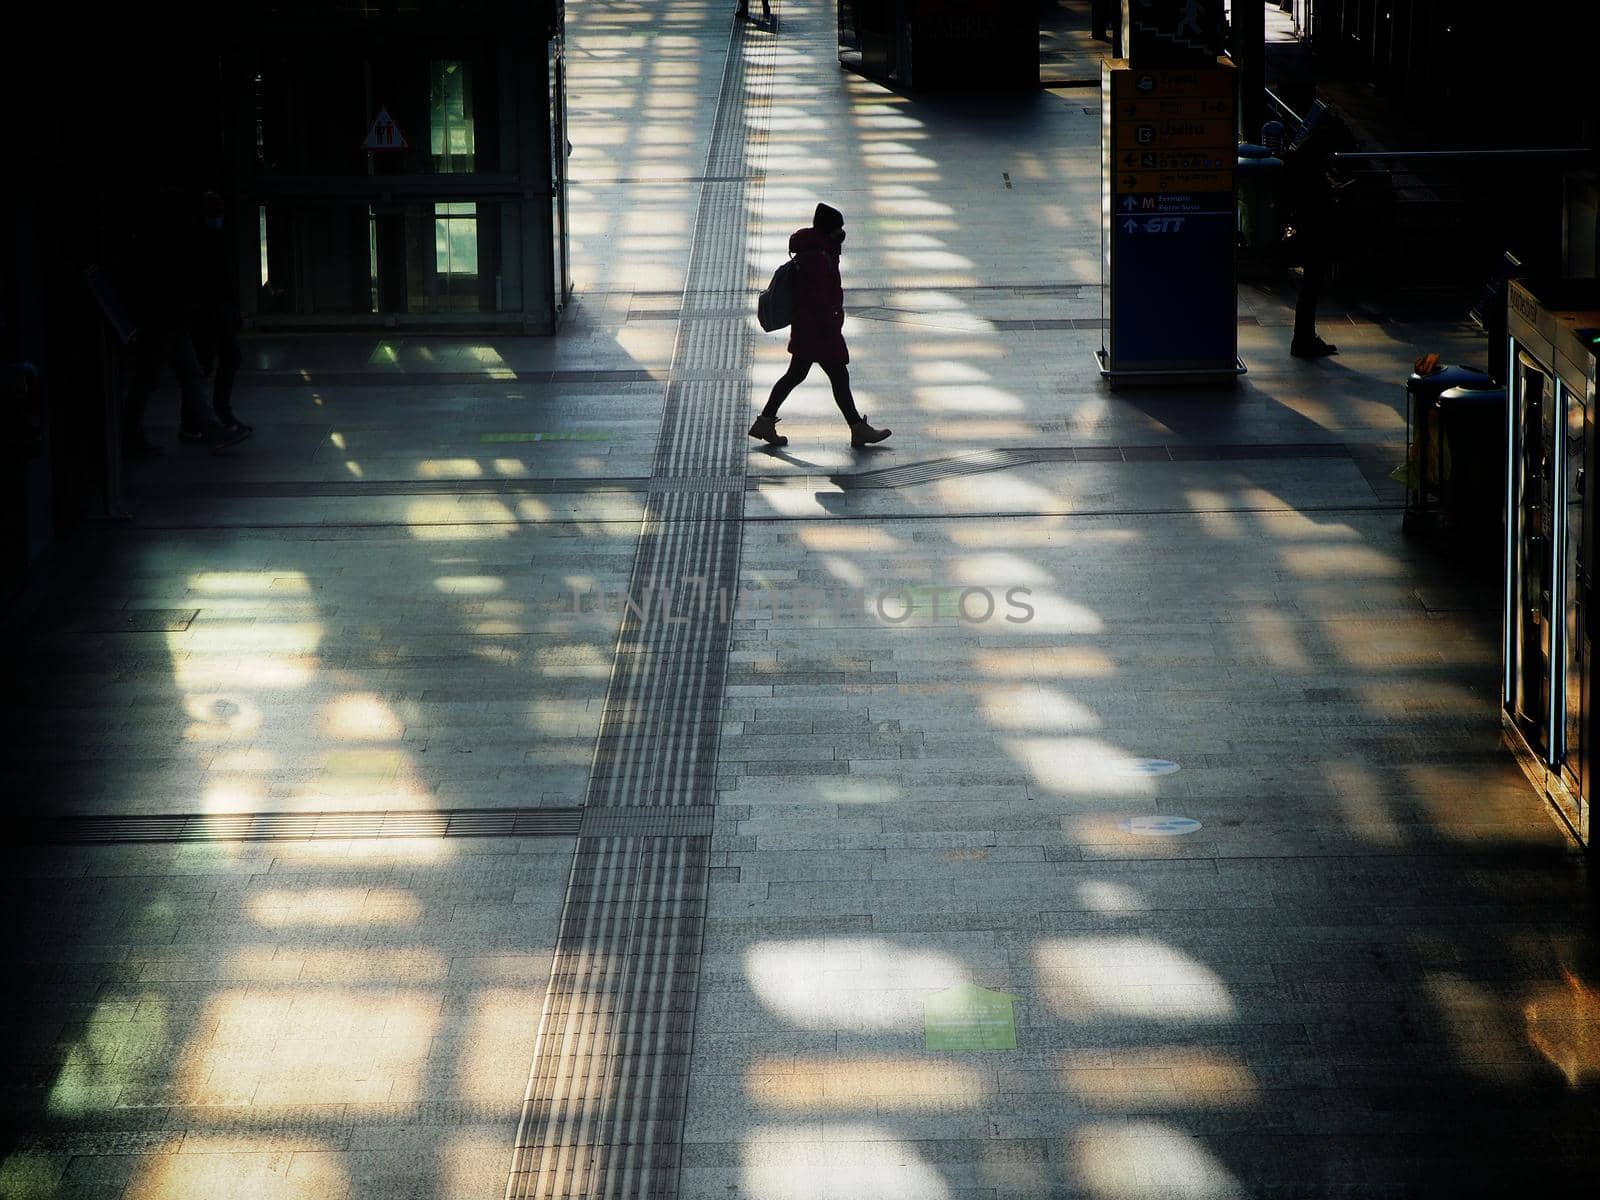 Woman silhouette walking wearing protective mask in train station Turin Italy January 13 2021 deliberated motion blurWoman silhouette walking wearing protective mask in train station Turin Italy January 13 2021 deliberated motion blur